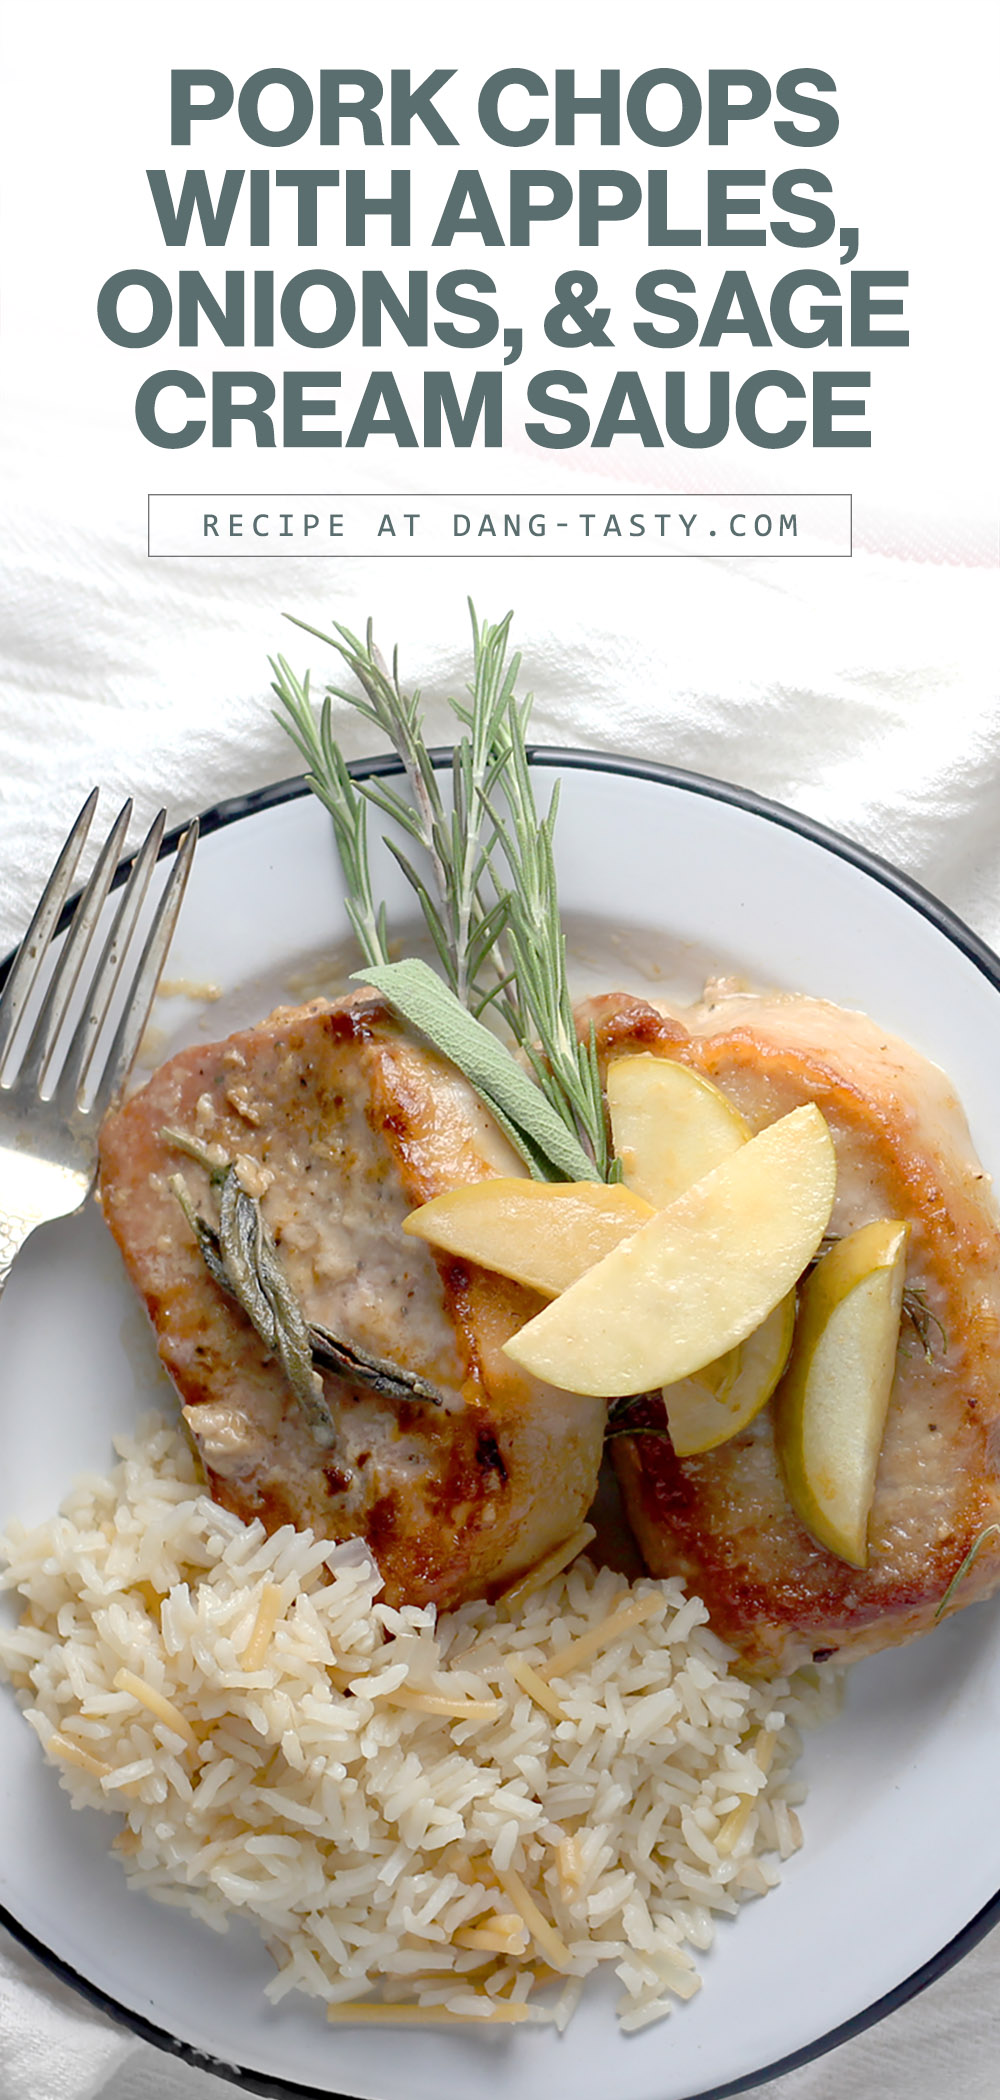 Lightly breaded pork chops are served with sauteed apples and onions and finished with the tastiest sage cream sauce. Get the full dang tasty recipe!